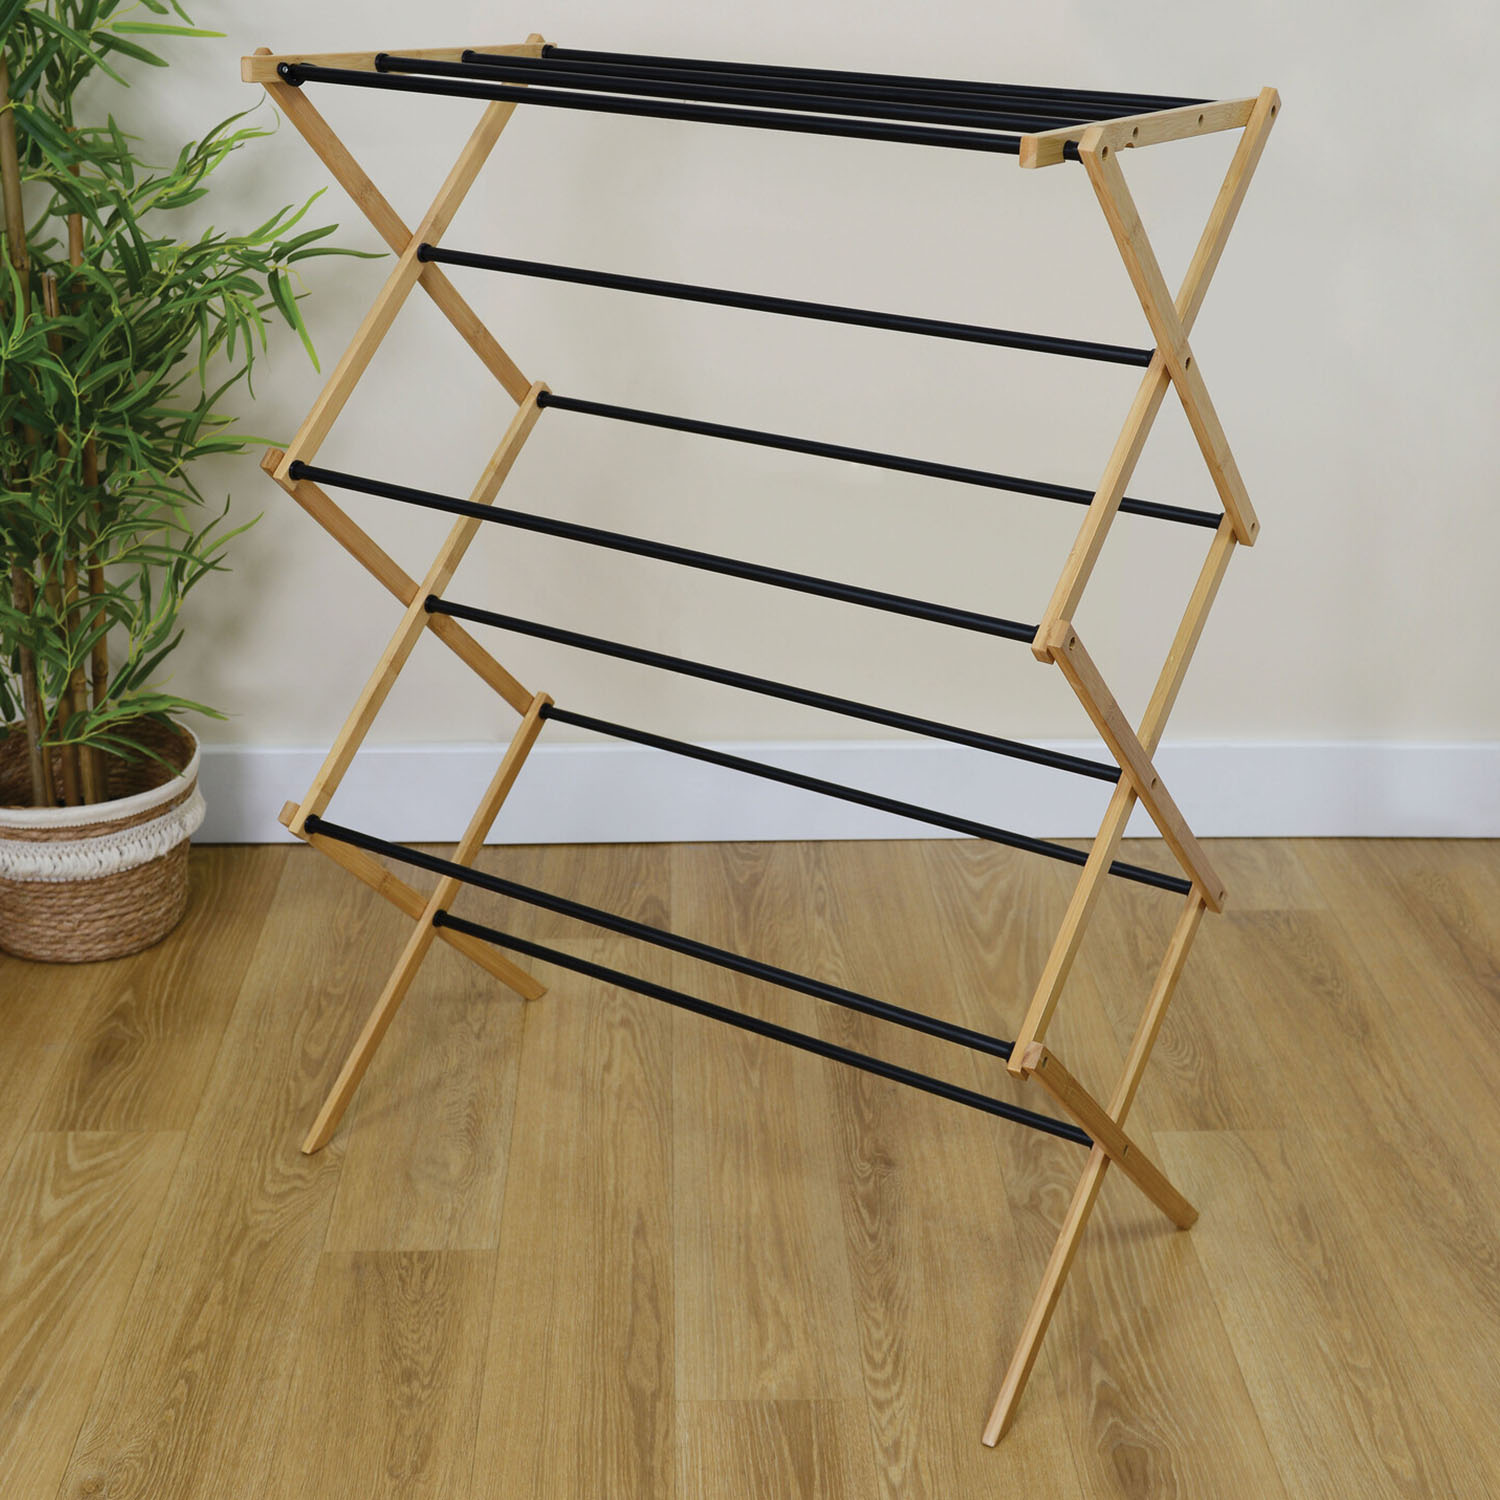 Bamboo 3 Tier Airer Image 2